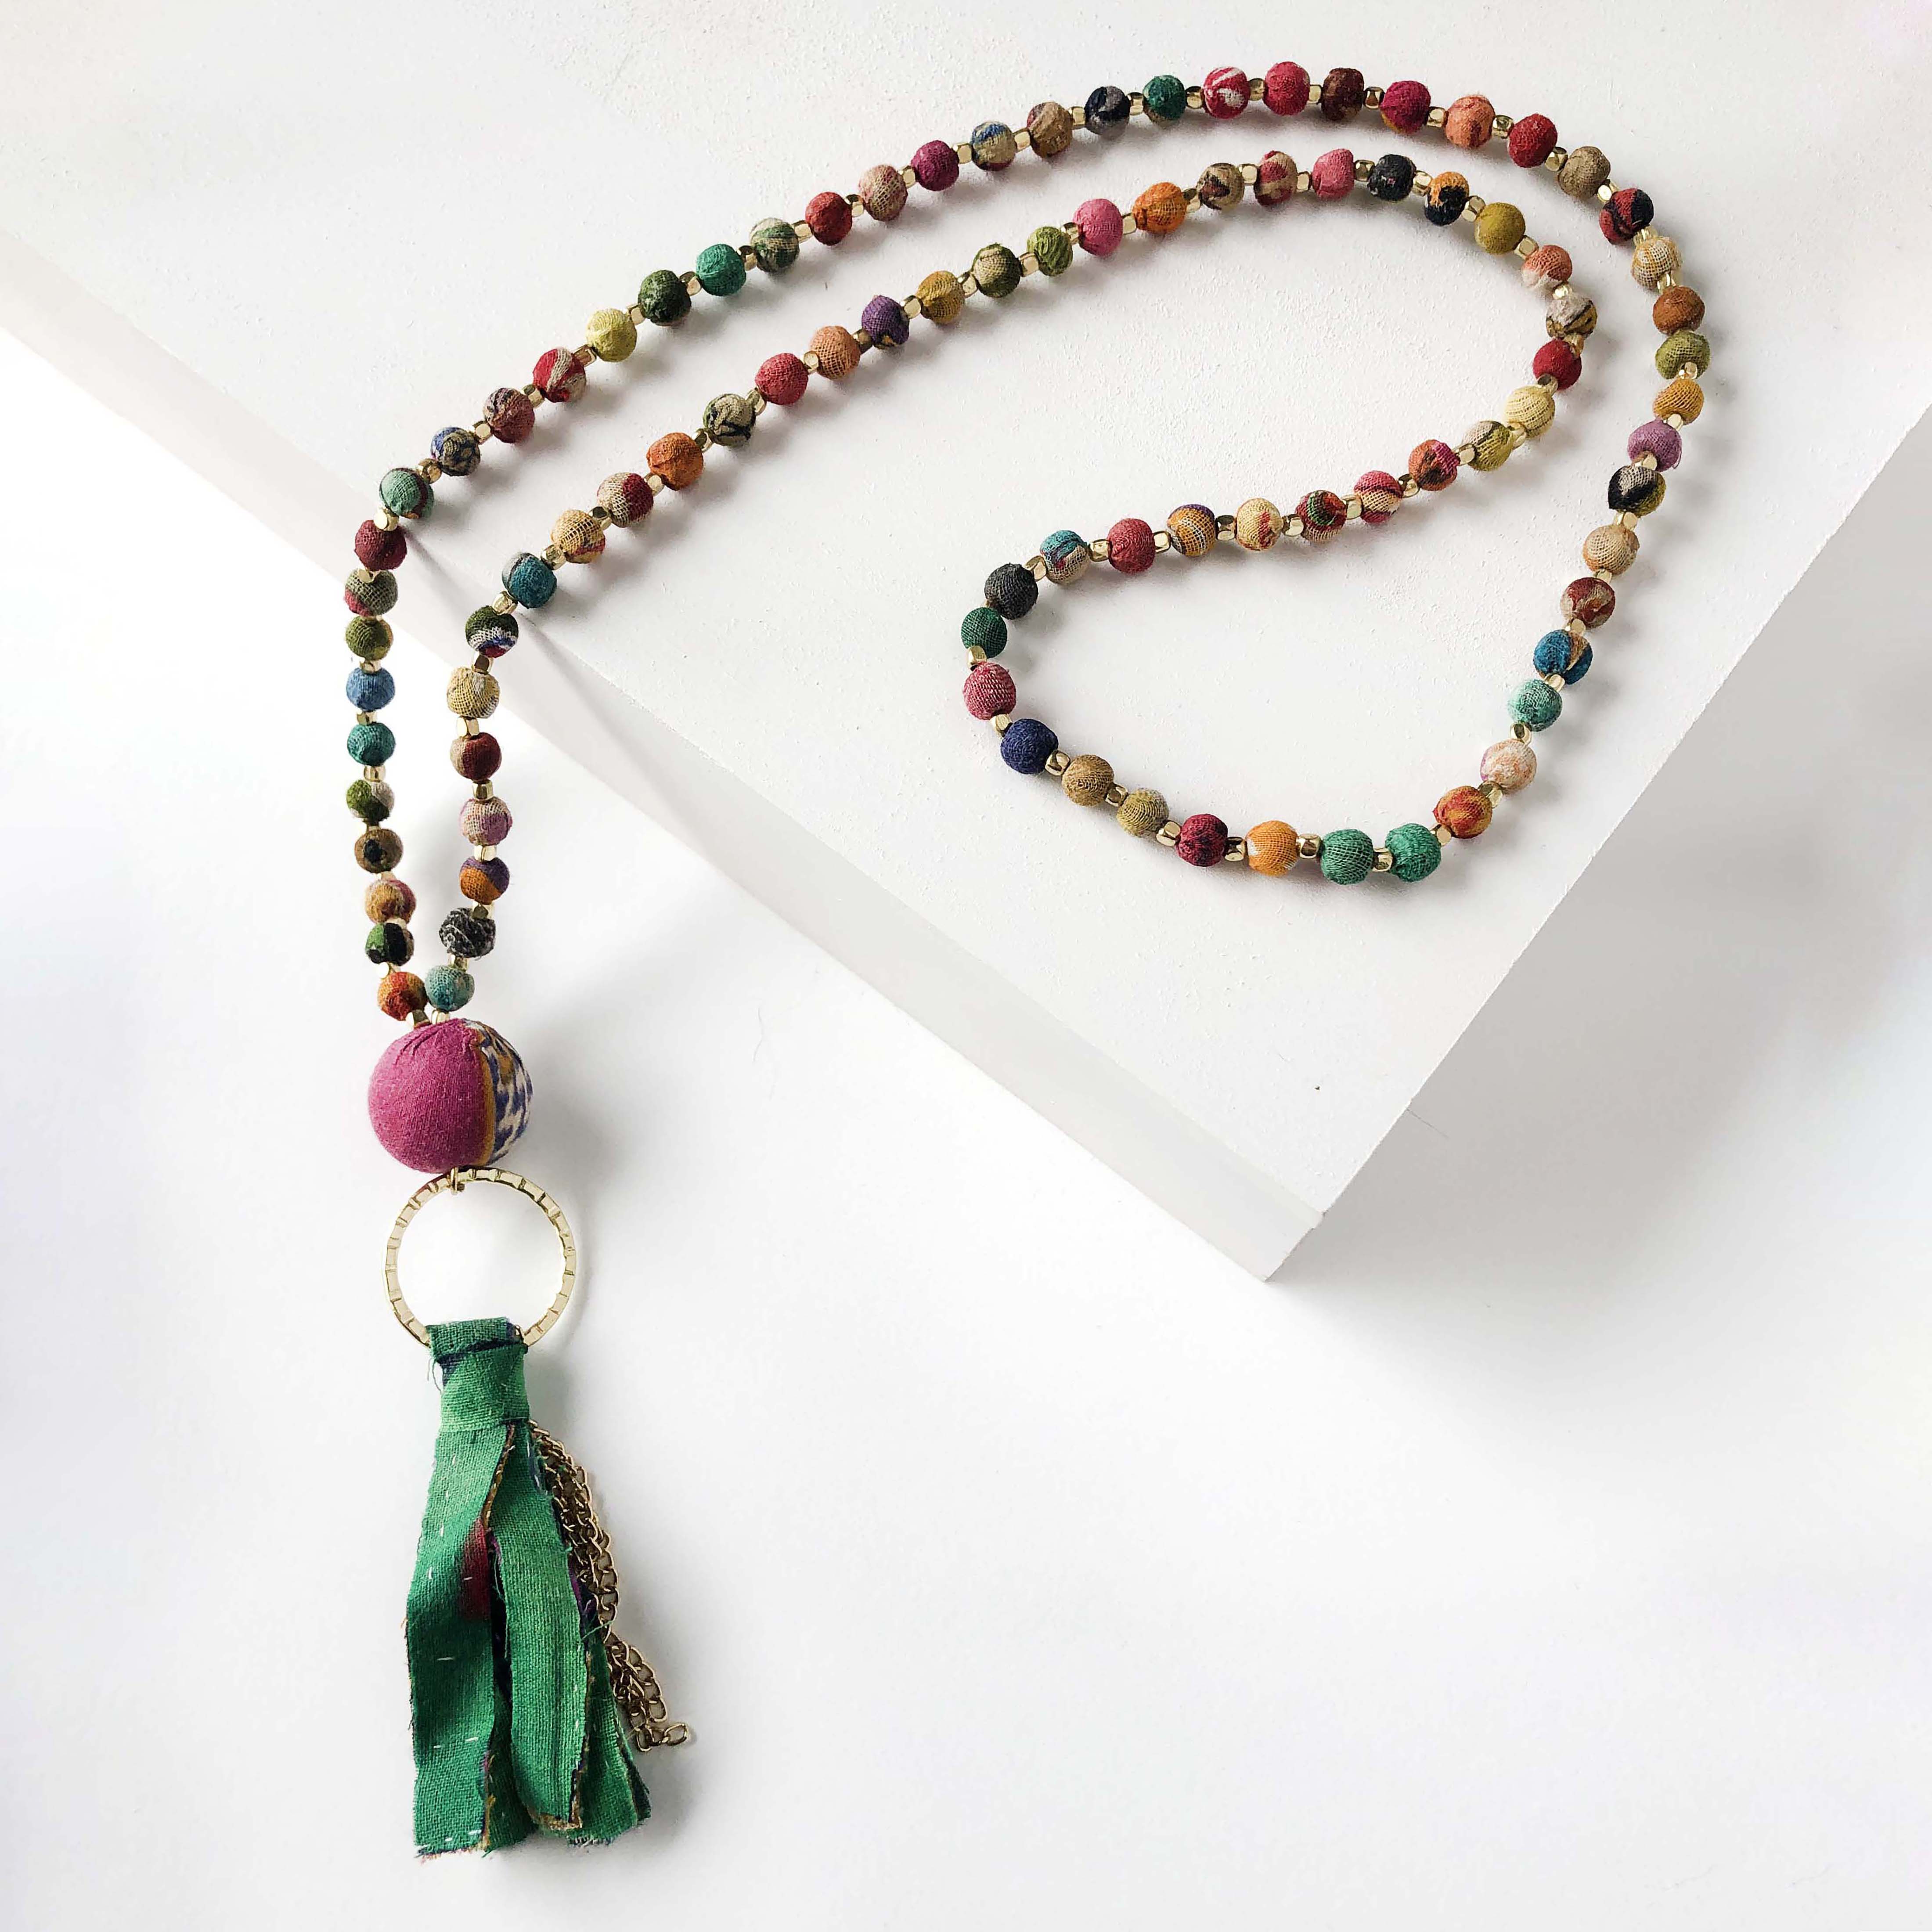 A strand of colorful textile-covered beads is punctuated with a statement bead and a colorful metallic-accented tassel.